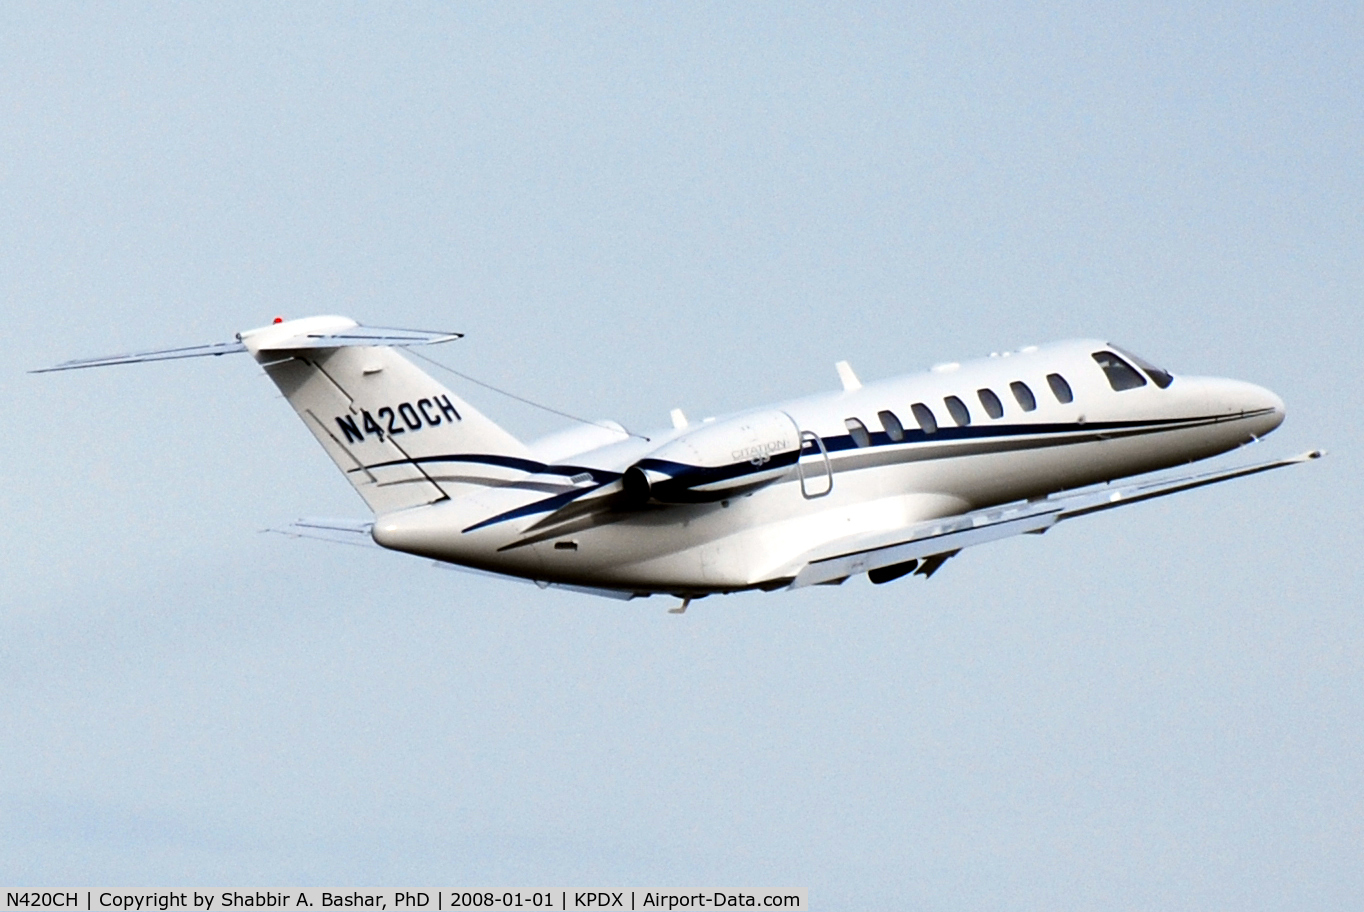 N420CH, 2007 Cessna 525B CitationJet Cj3 C/N 525B0151, Shortly after take off from the northern runway.